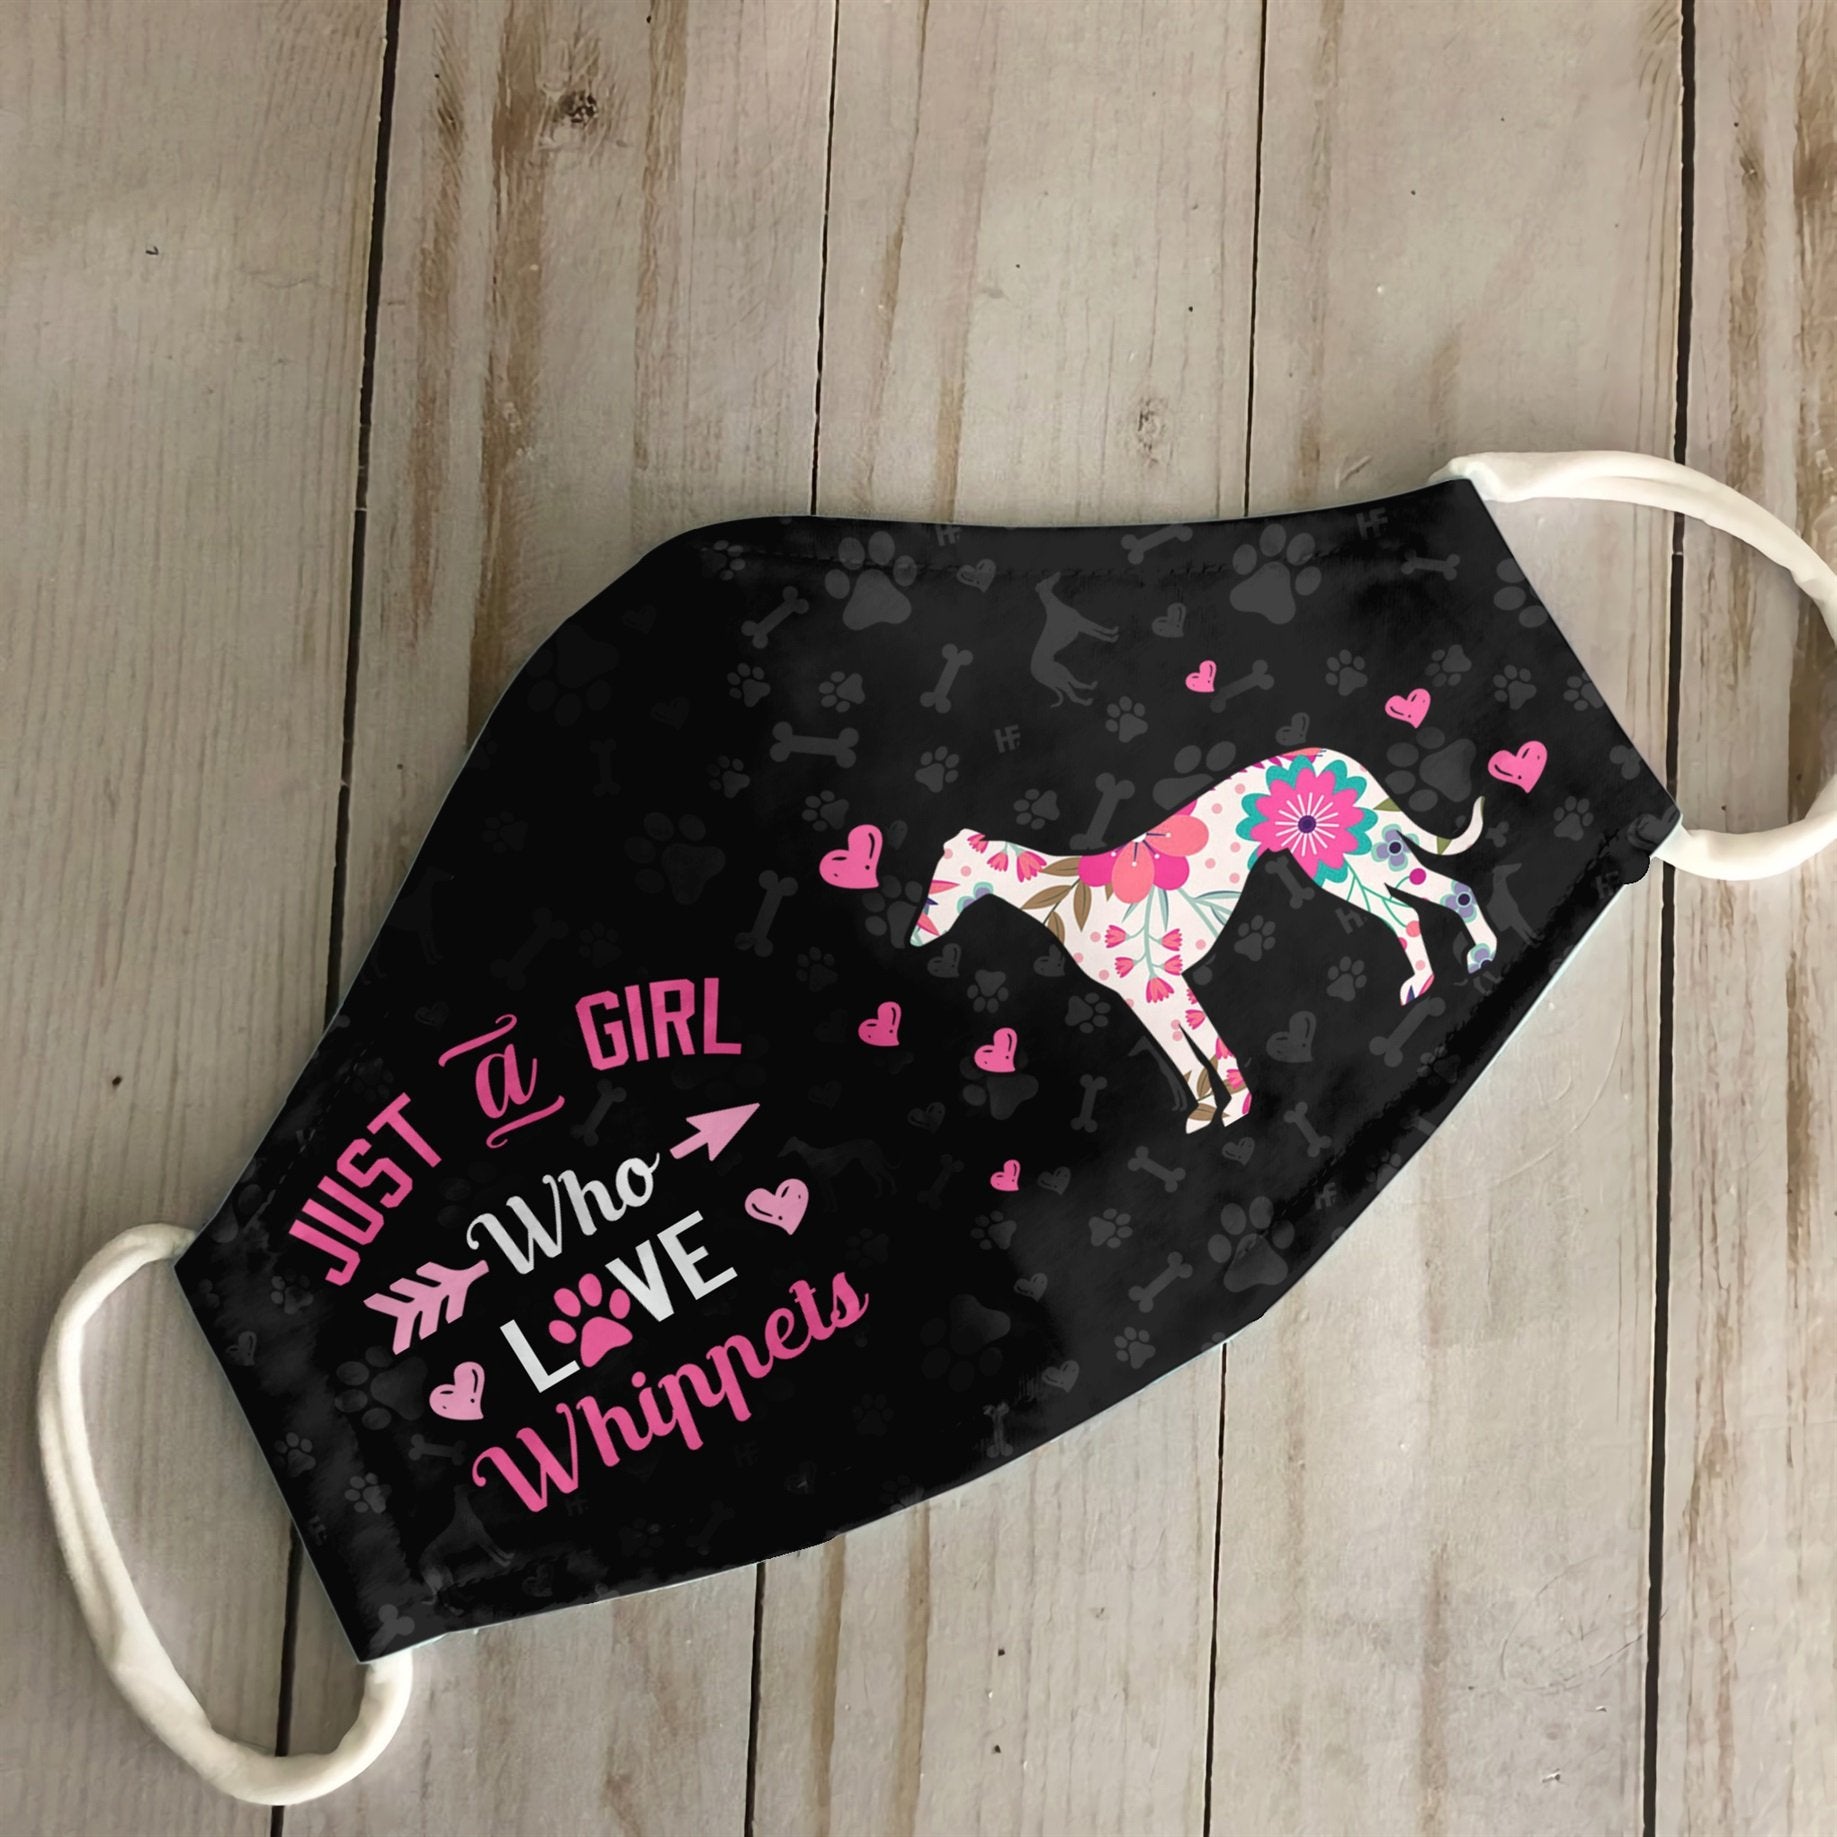 Just A Girl Who Loves Whippets EZ07 3107 Face Mask